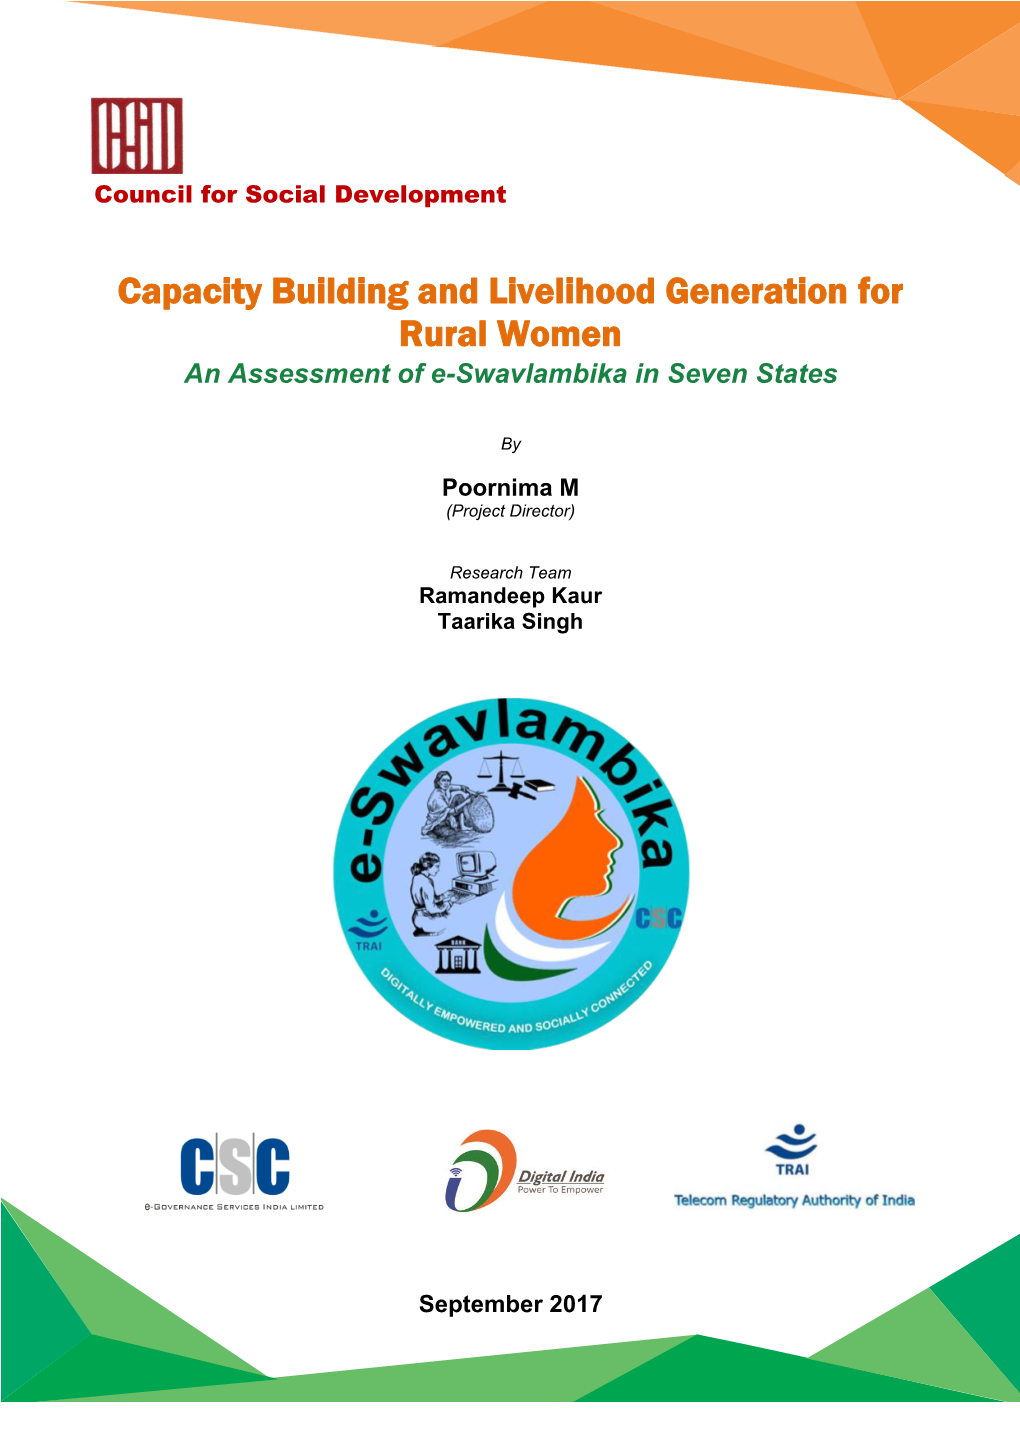 Capacity Building and Livelihood Generation for Rural Women an Assessment of E-Swavlambika in Seven States